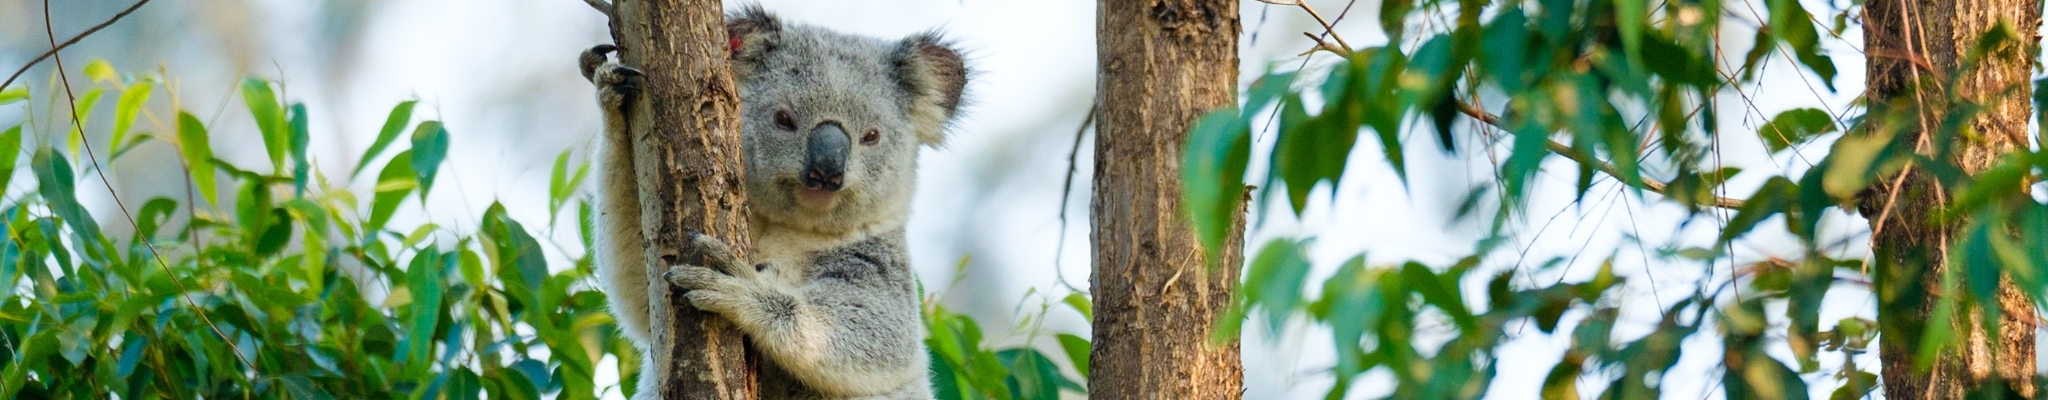 How you can protect koalas on your property